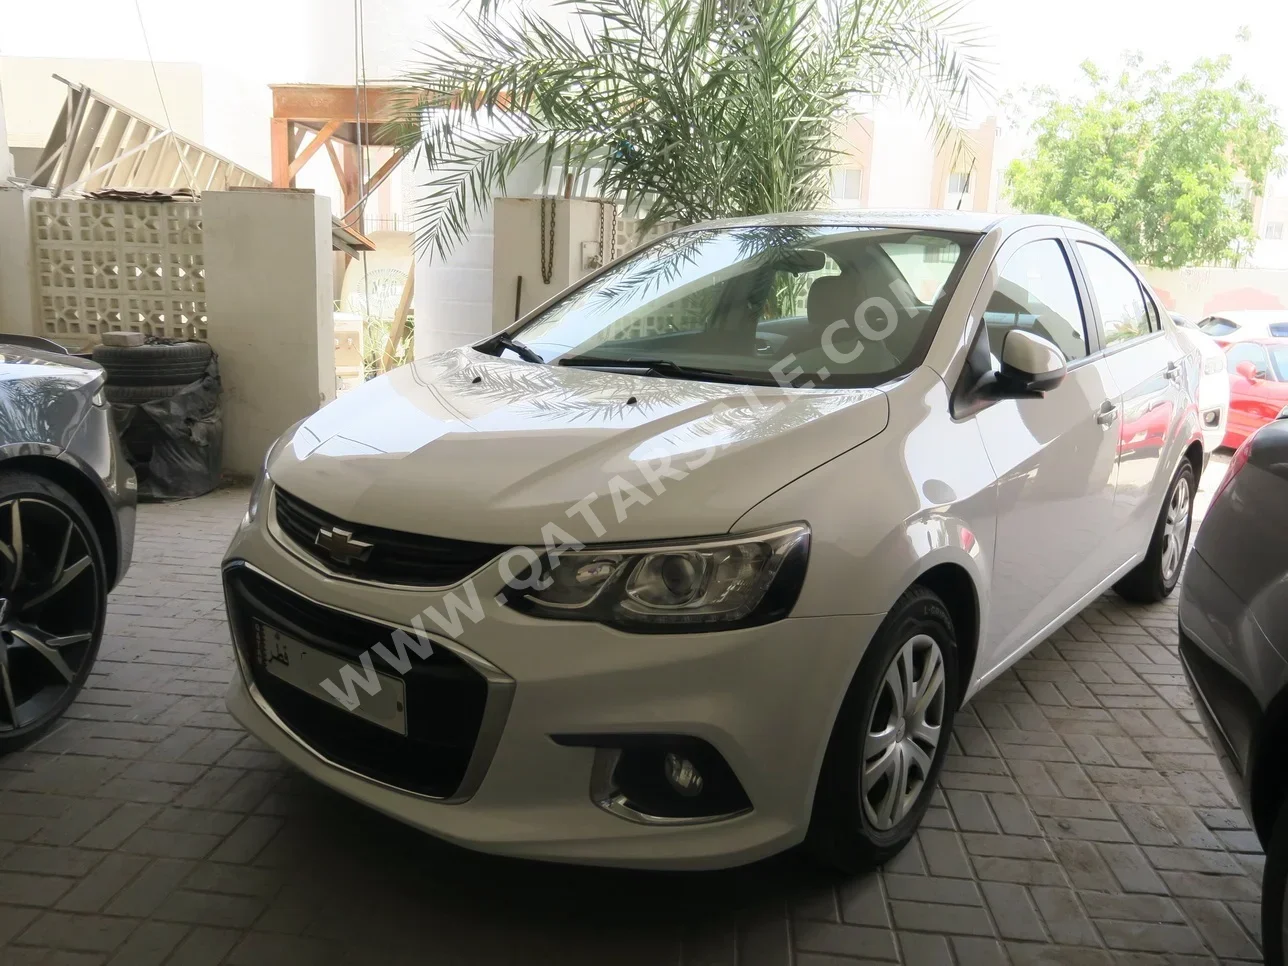 Chevrolet  Aveo  2018  Automatic  75,000 Km  4 Cylinder  Front Wheel Drive (FWD)  Sedan  White